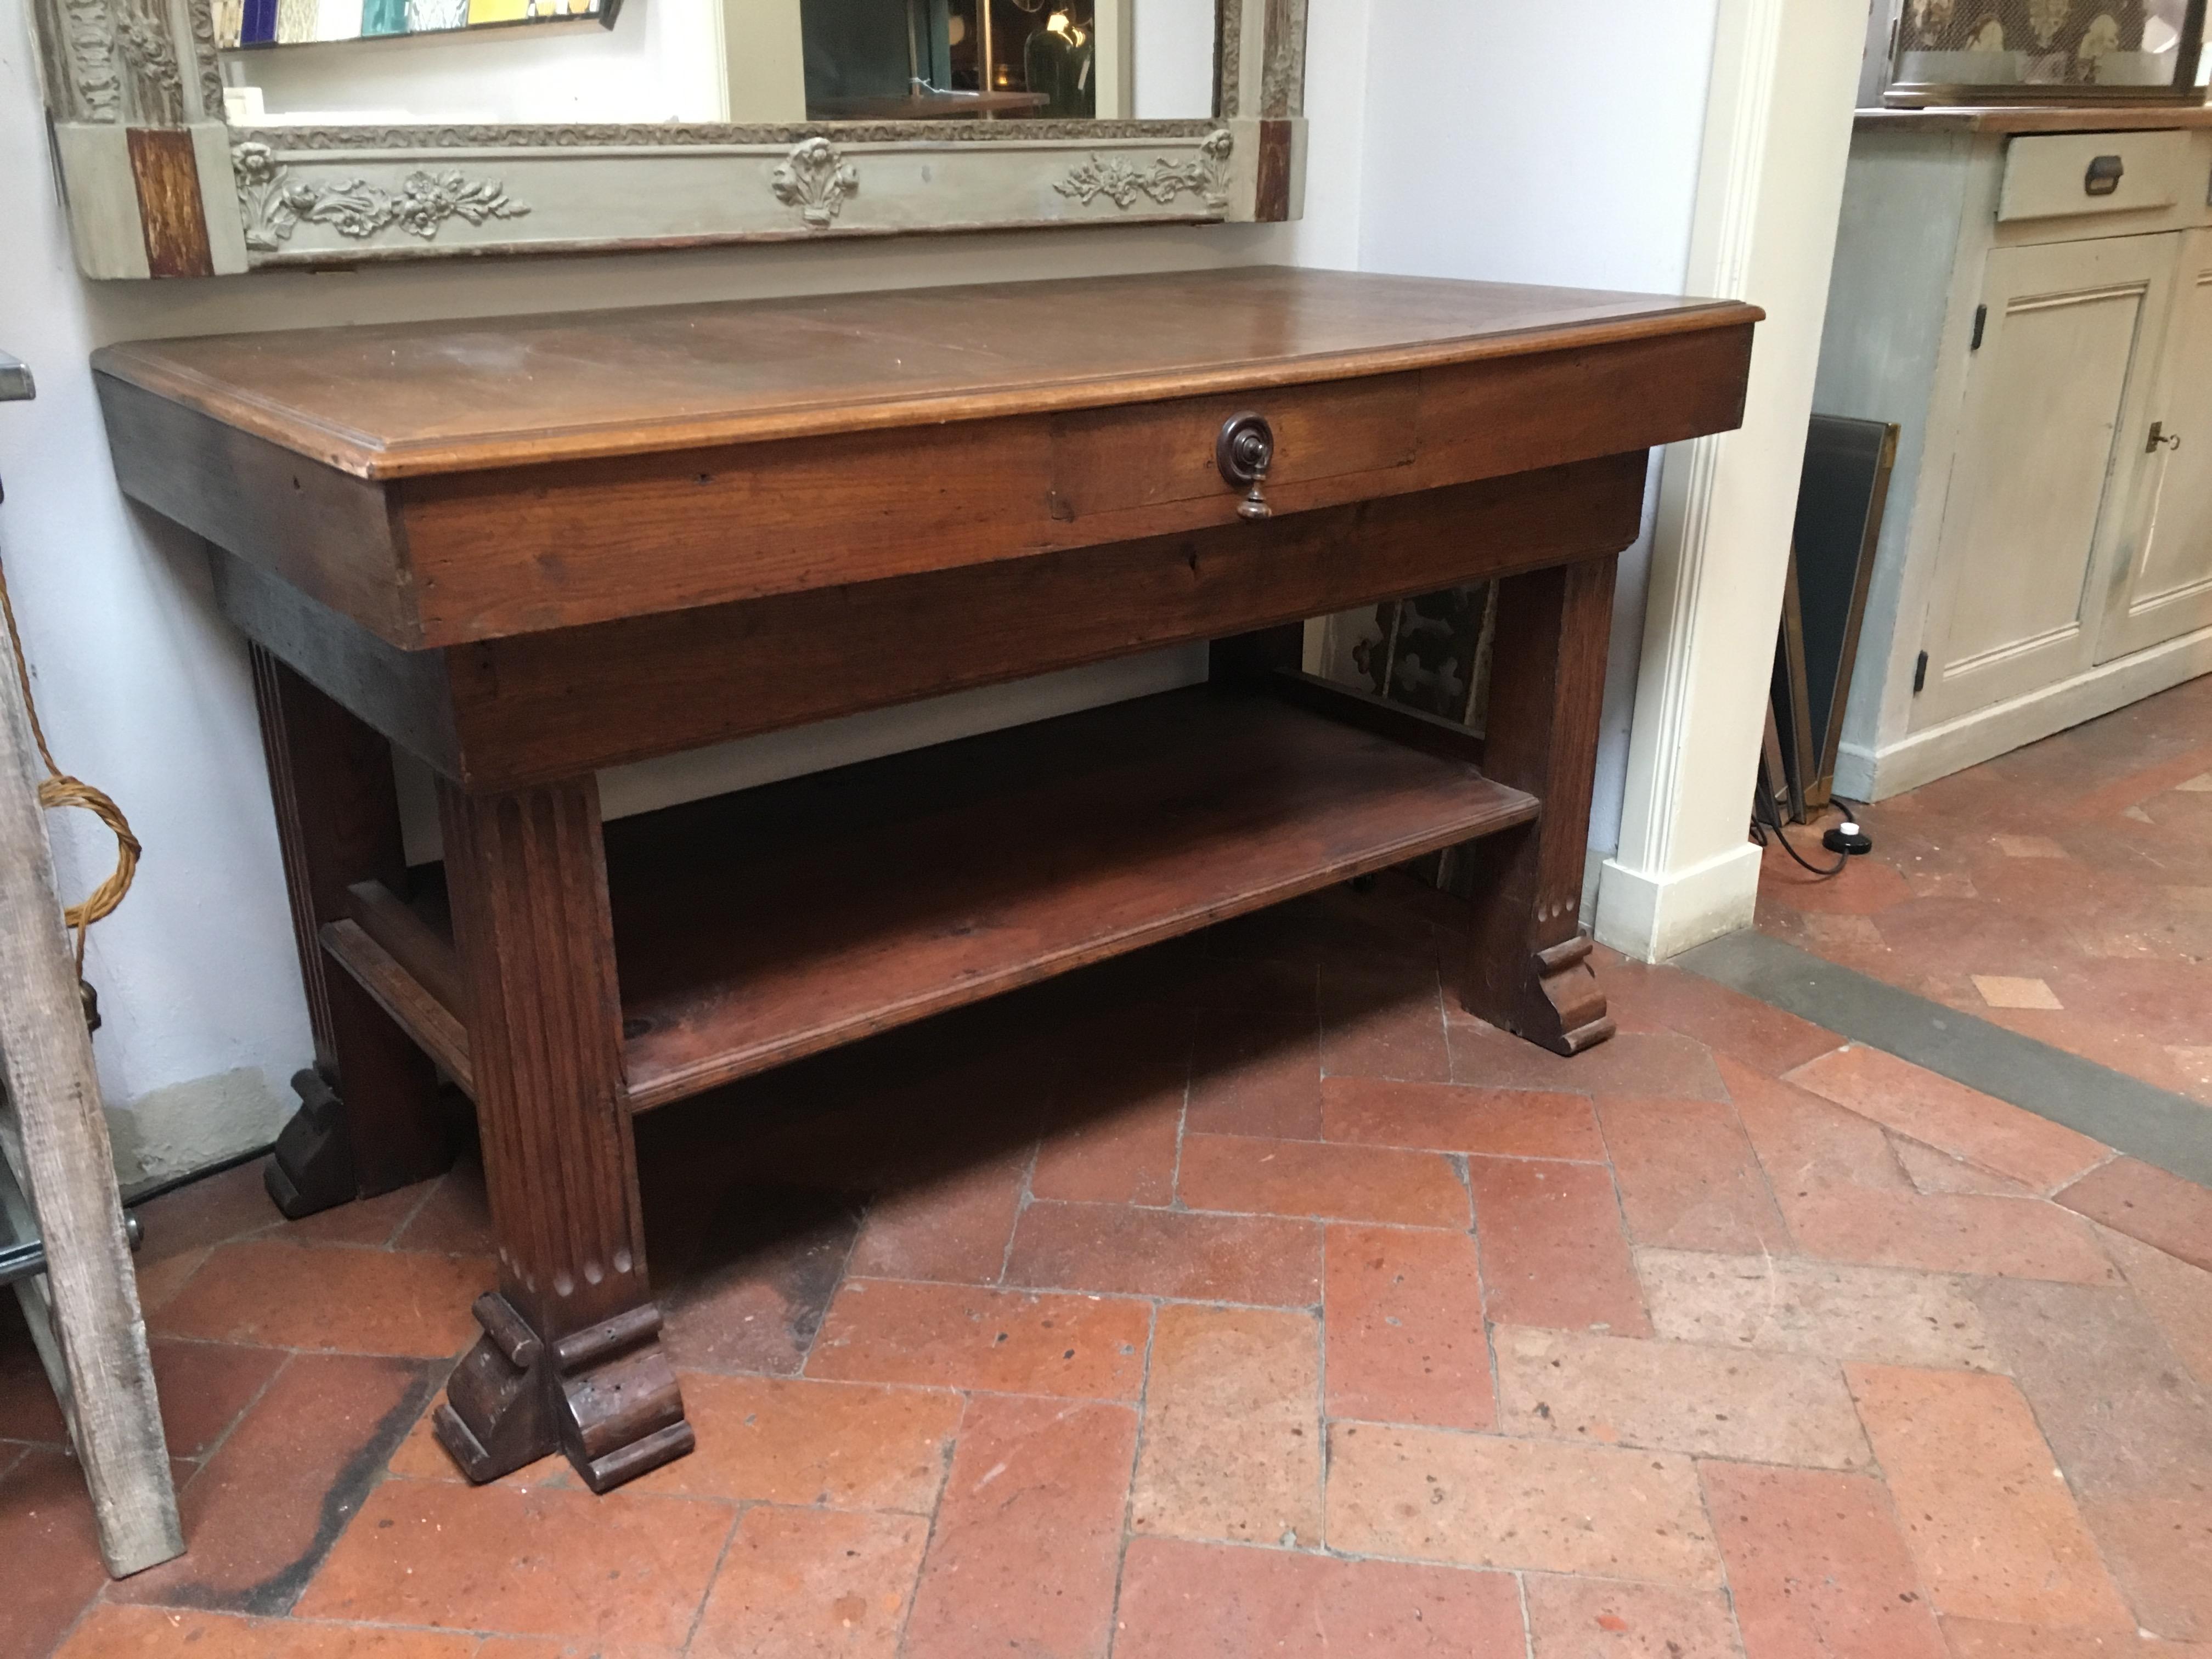 19th century French carved oakwood counter with drawer. 1890s.